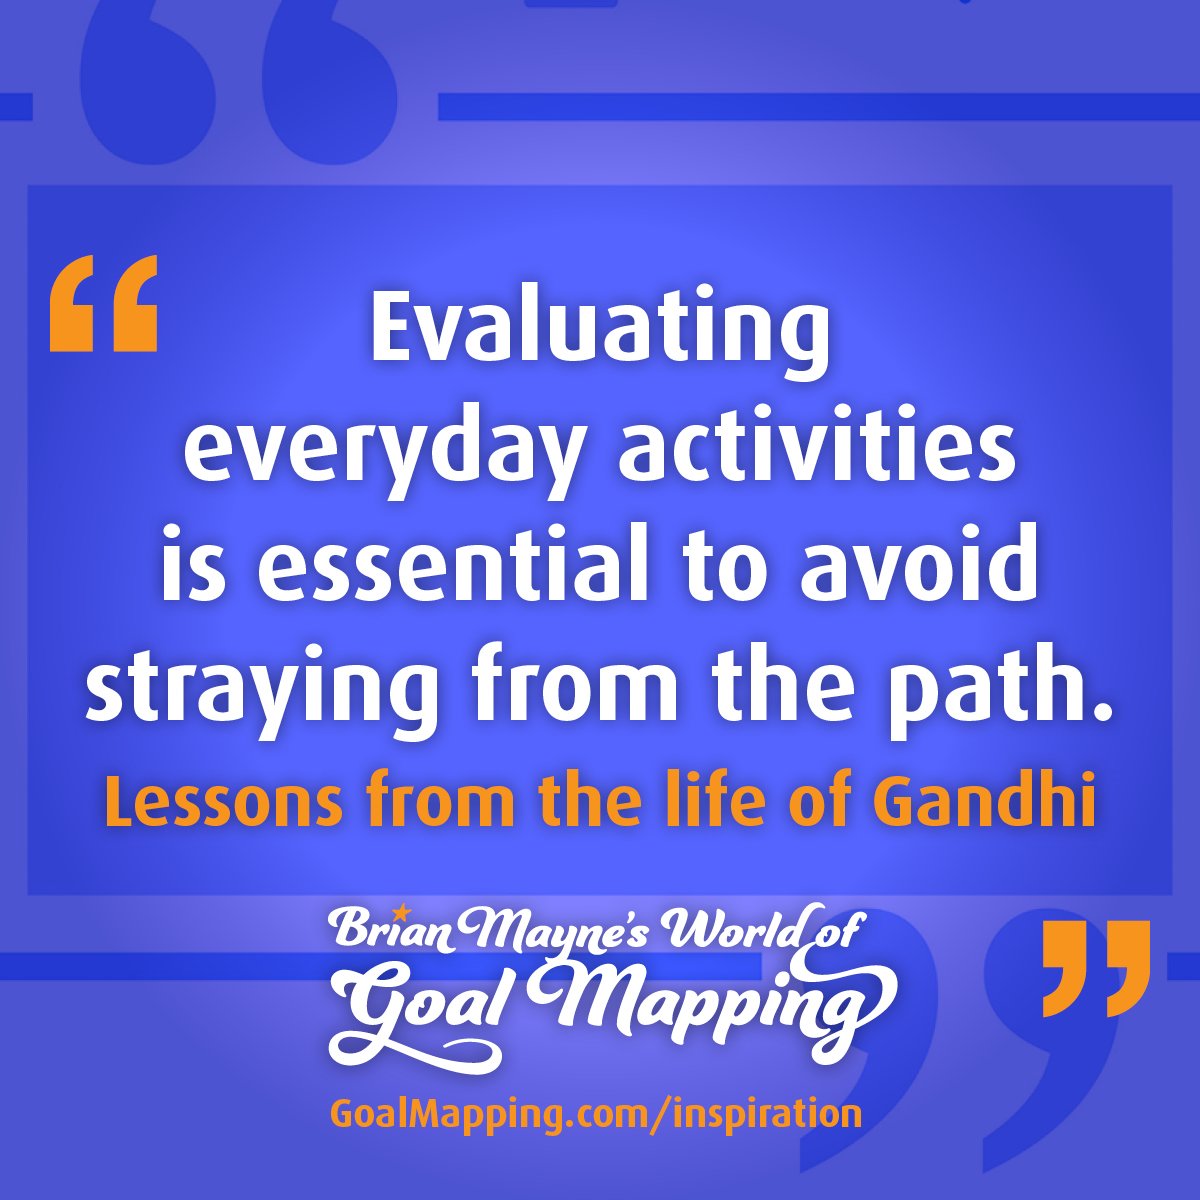 Evaluating everyday activities is essential to avoid straying from the path. Lessons from the life of Gandhi